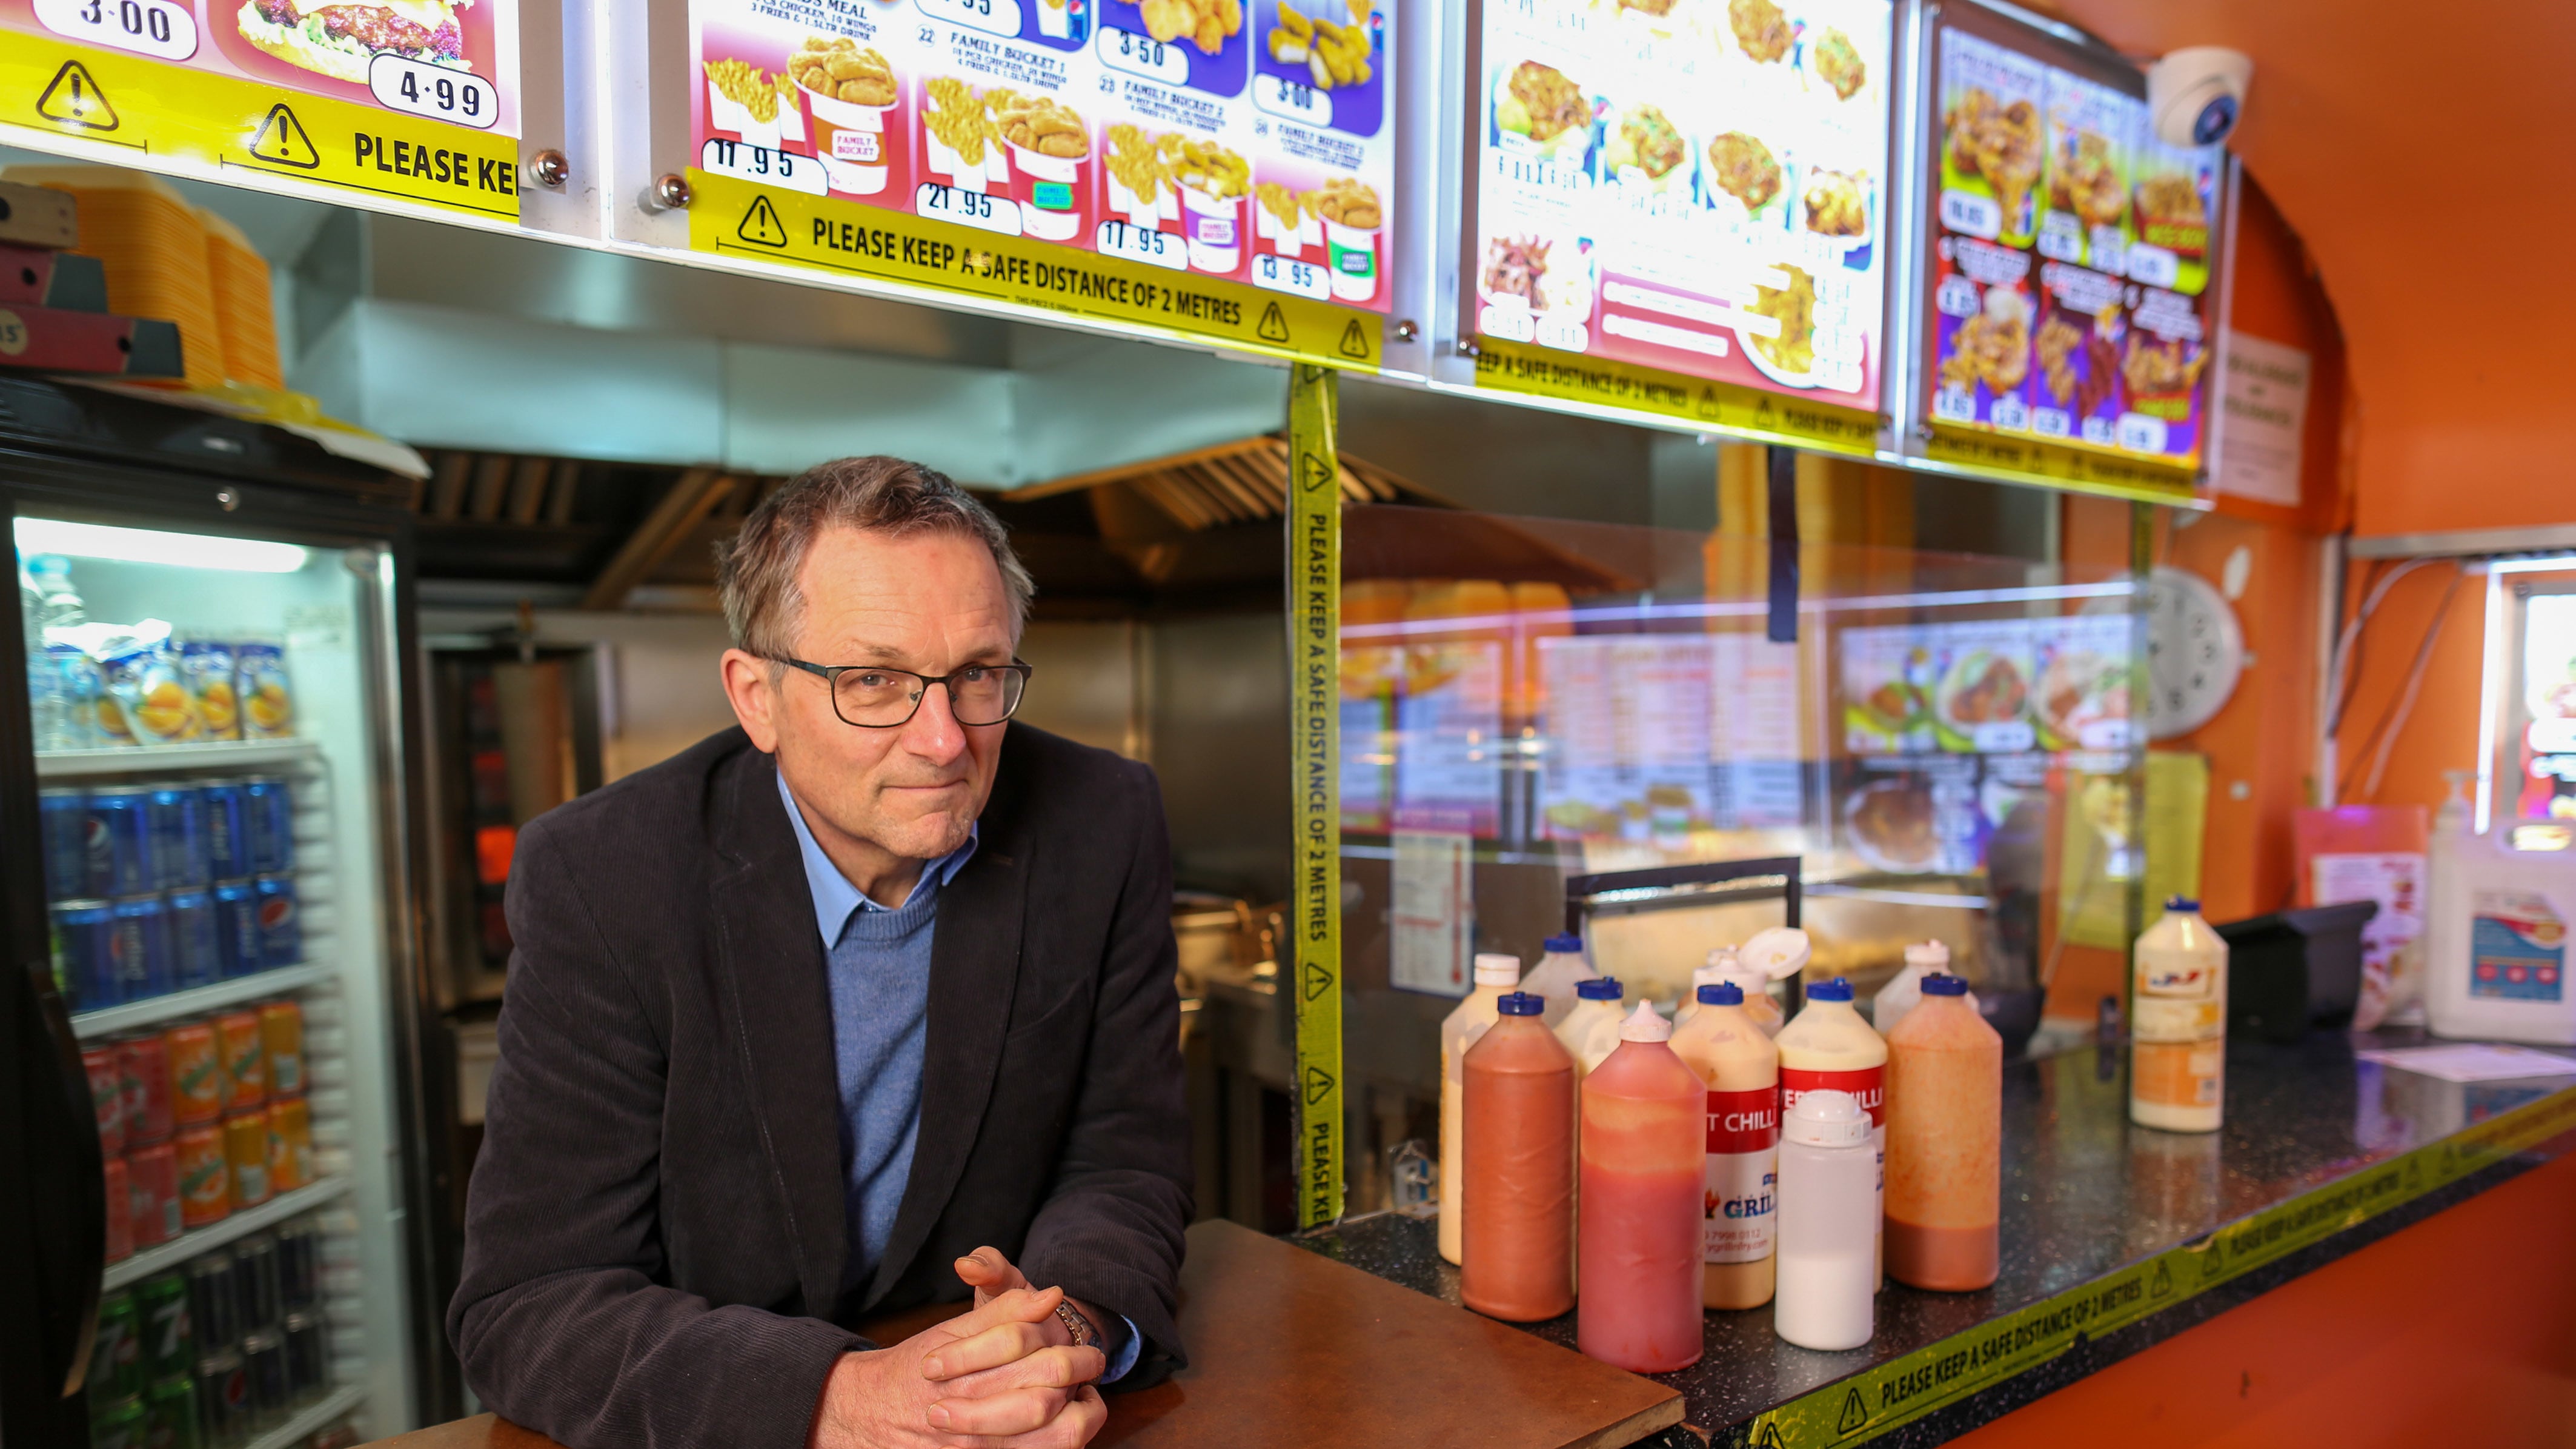 Television presenter Dr Michael Mosley has been hailed a hero for his healthy eating advice